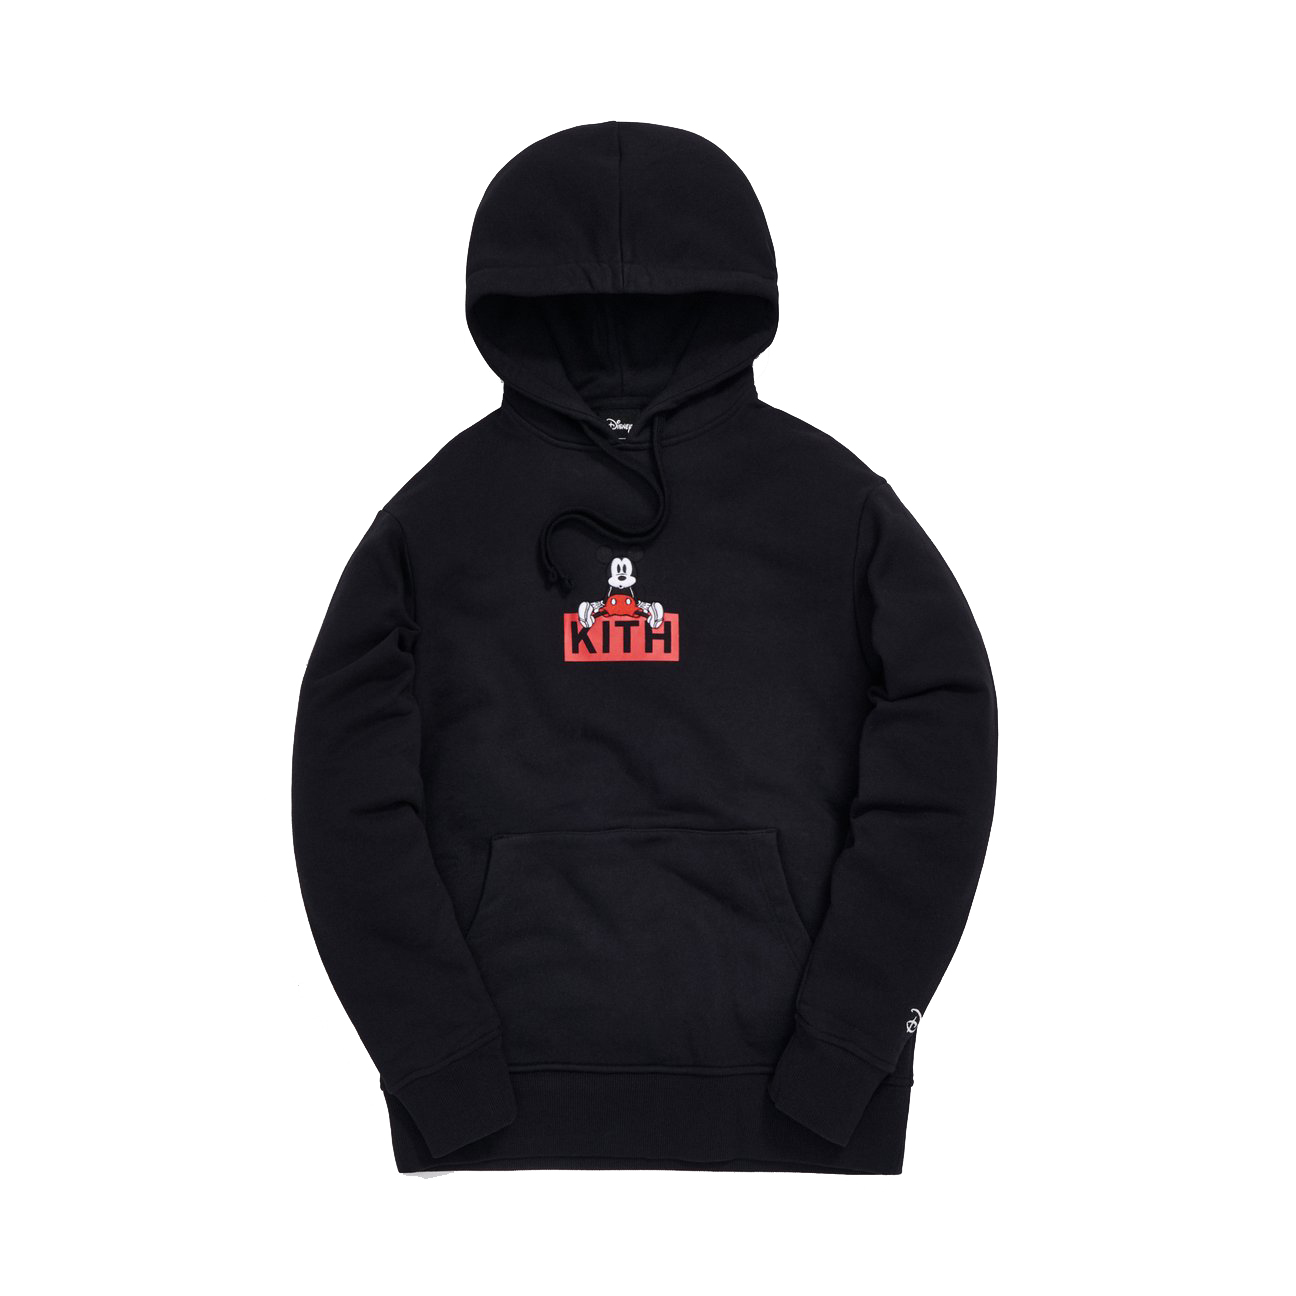 KITH x Disney Mickey Sleeve Patches Hoodie Red - Novelship